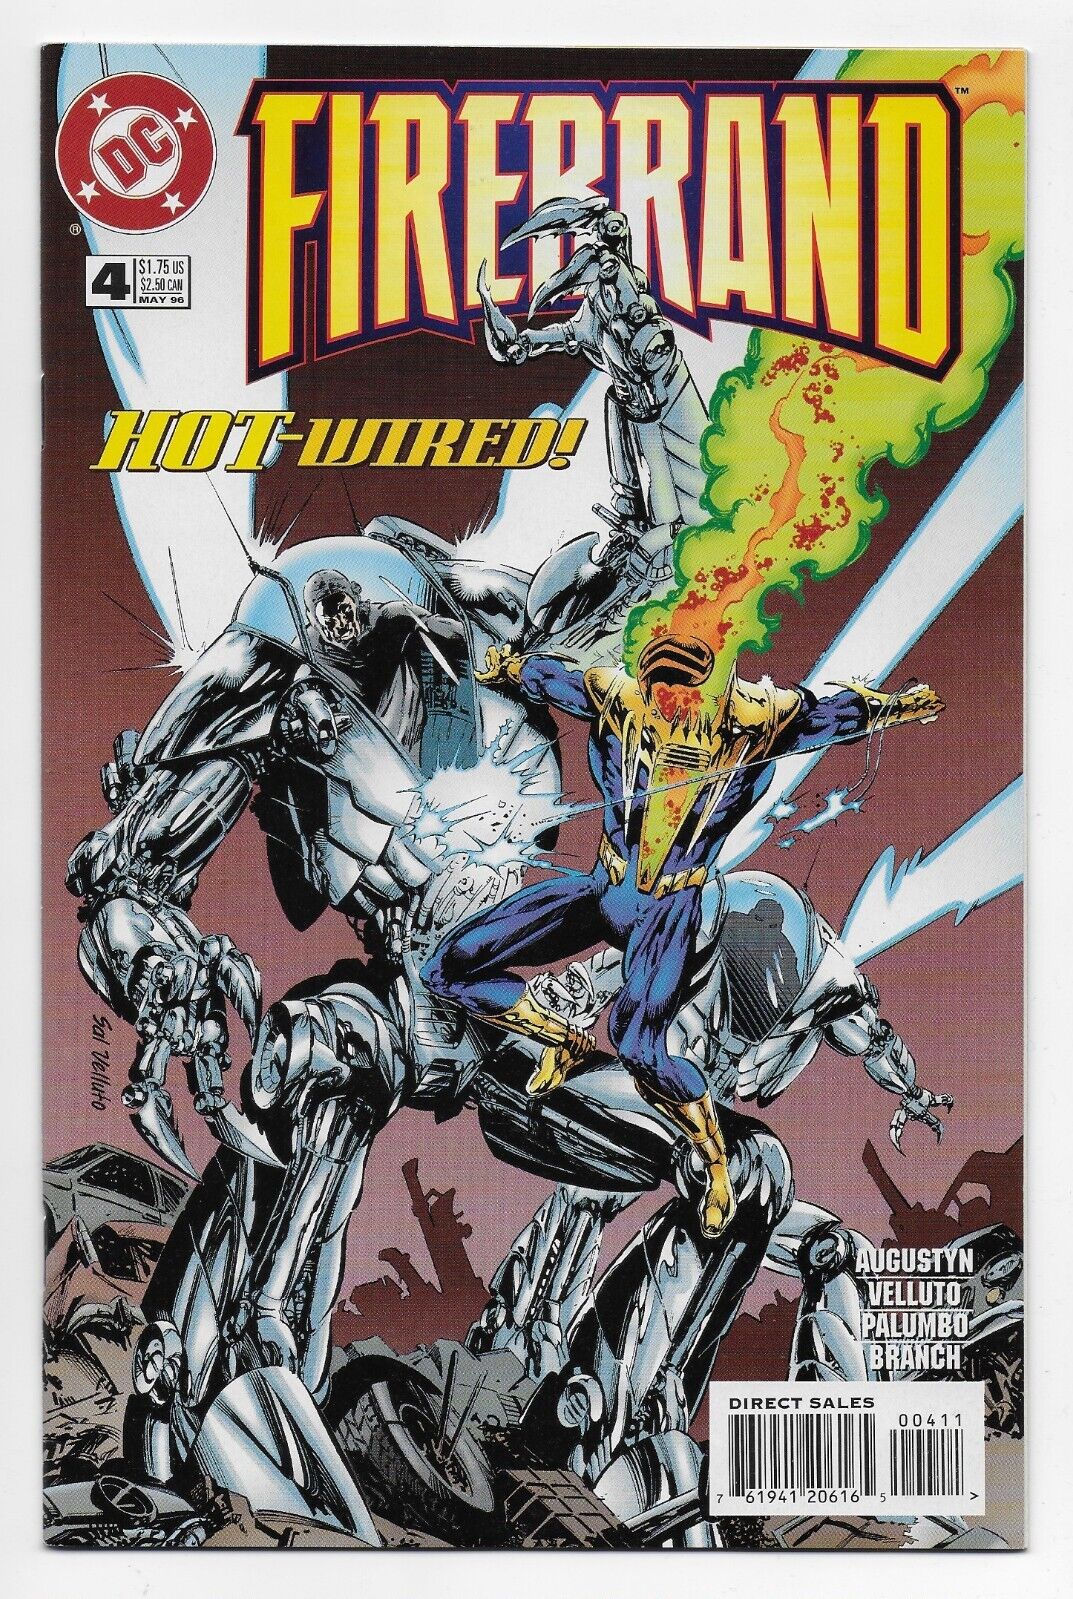 FIREBRAND #4 DC Comics 1996 Bagged & Boarded We Combine Shipping